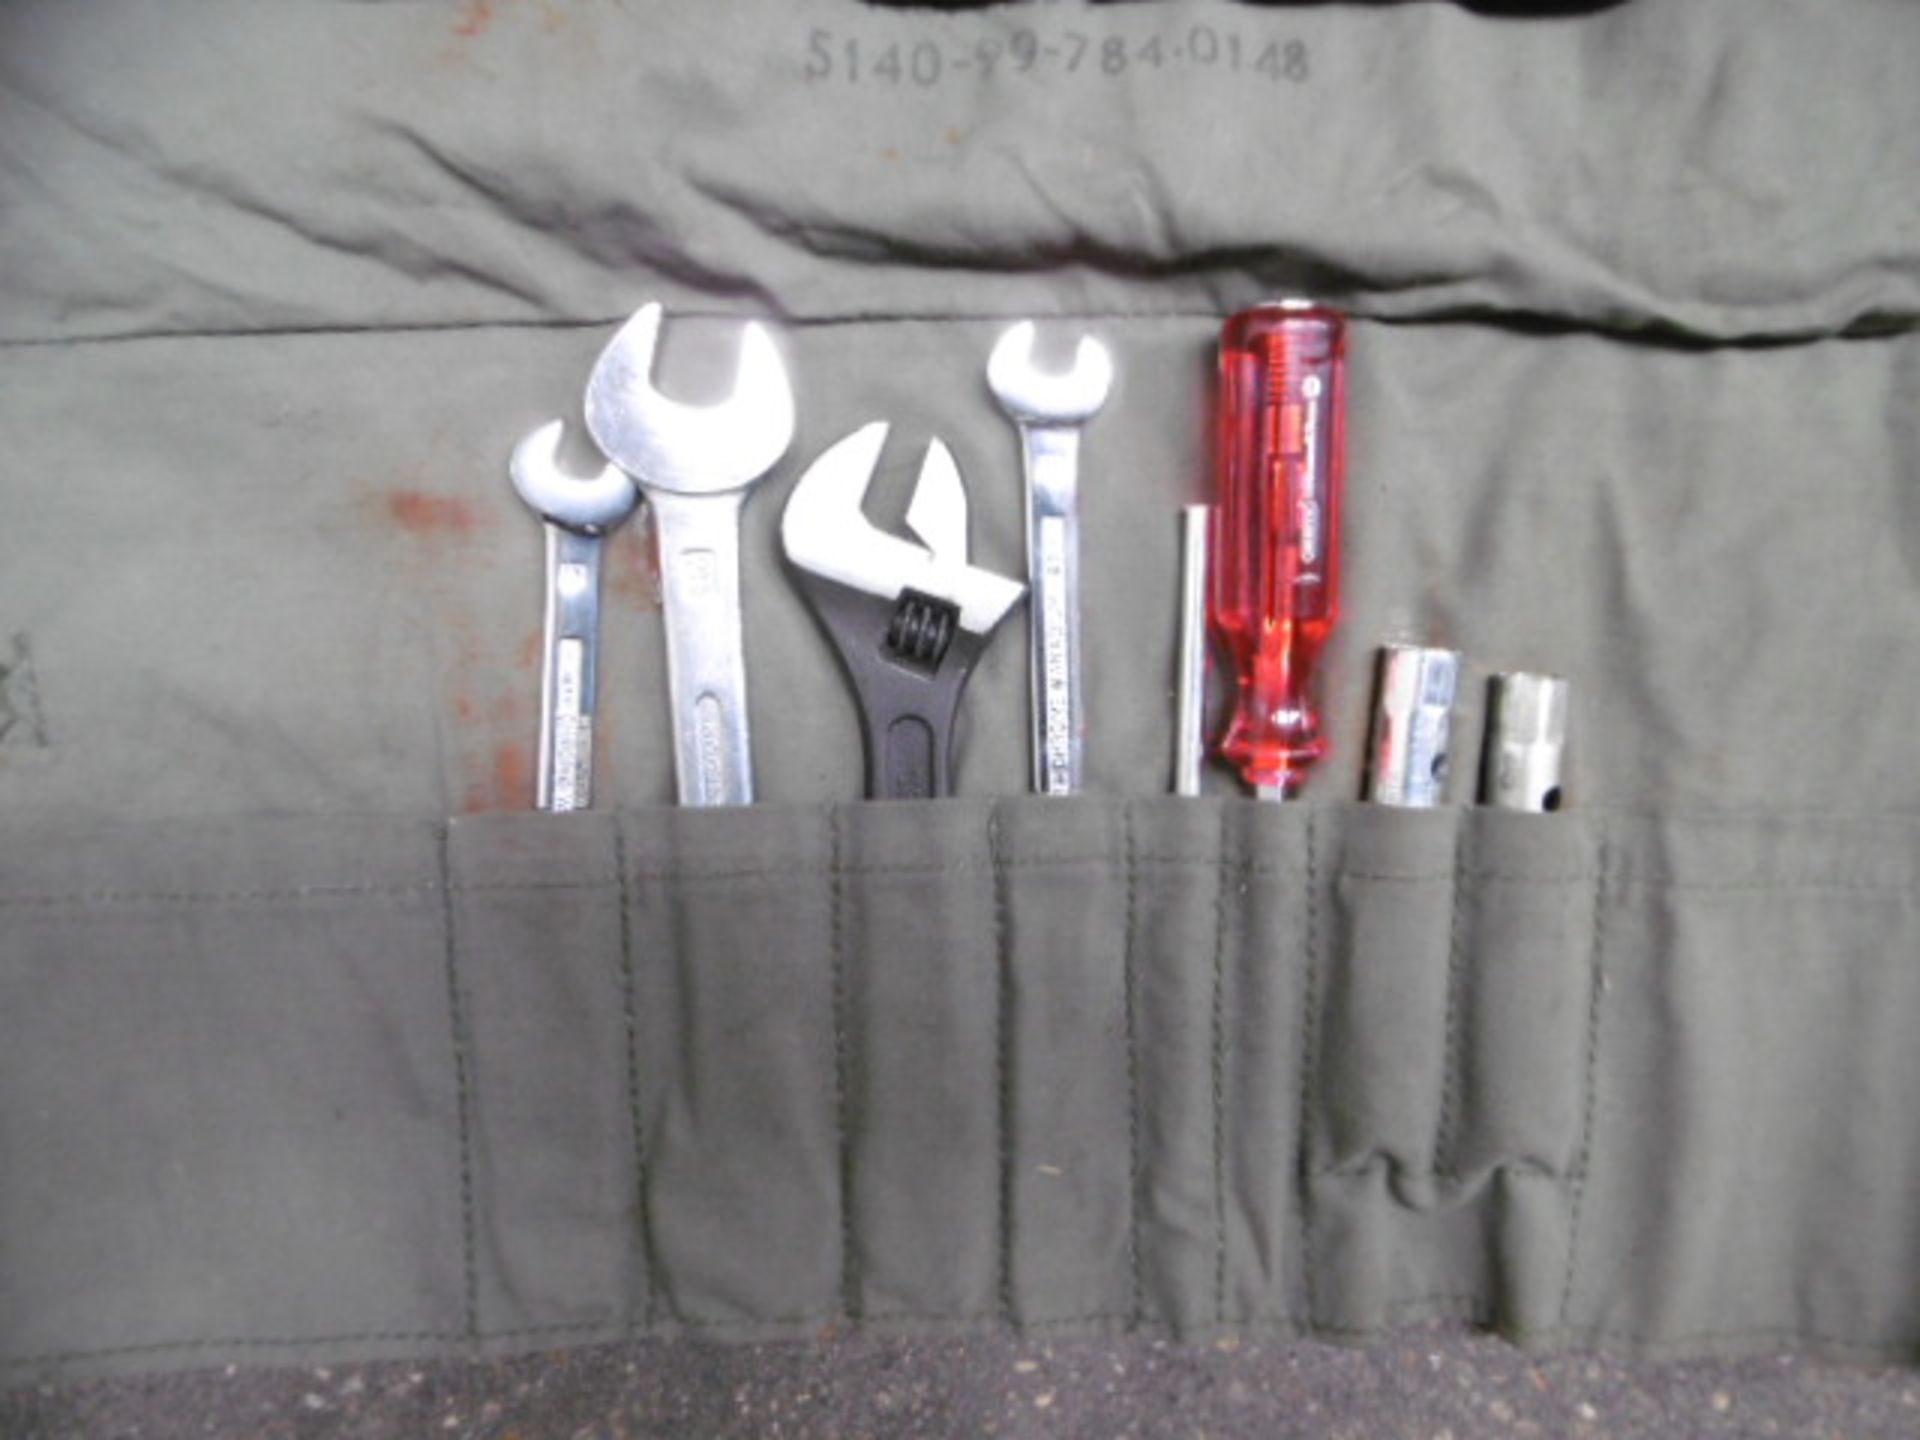 5 x Land Rover FFR Tool Kits - Image 3 of 3